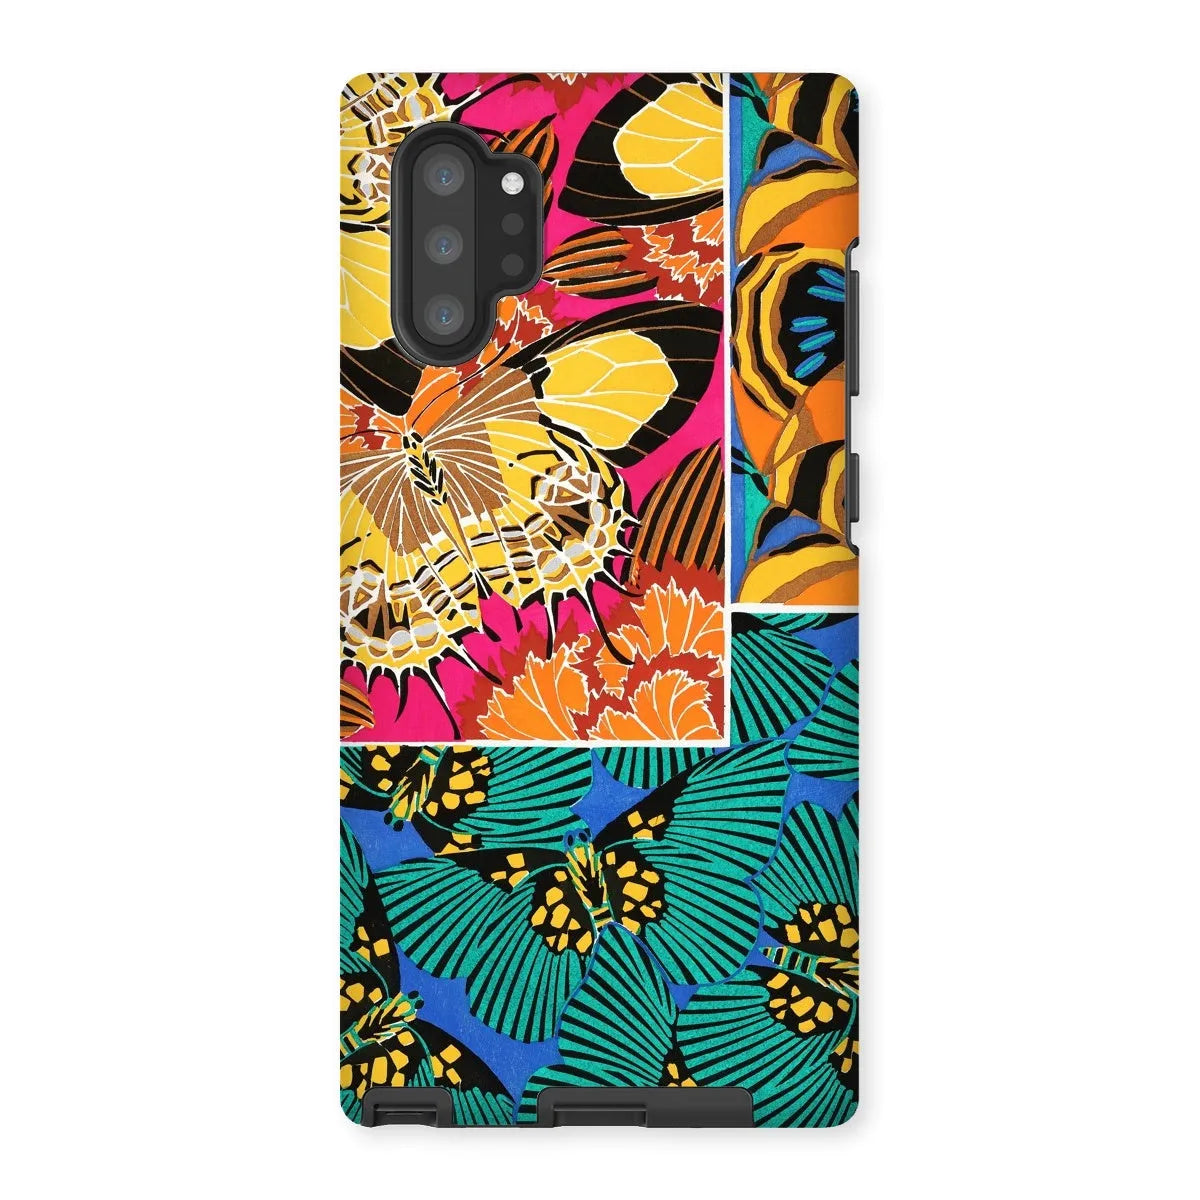 Rainbow Butterfly Aesthetic Art Phone Case - E.a. Seguy - Samsung Galaxy Note 10p / Matte - Mobile Phone Cases